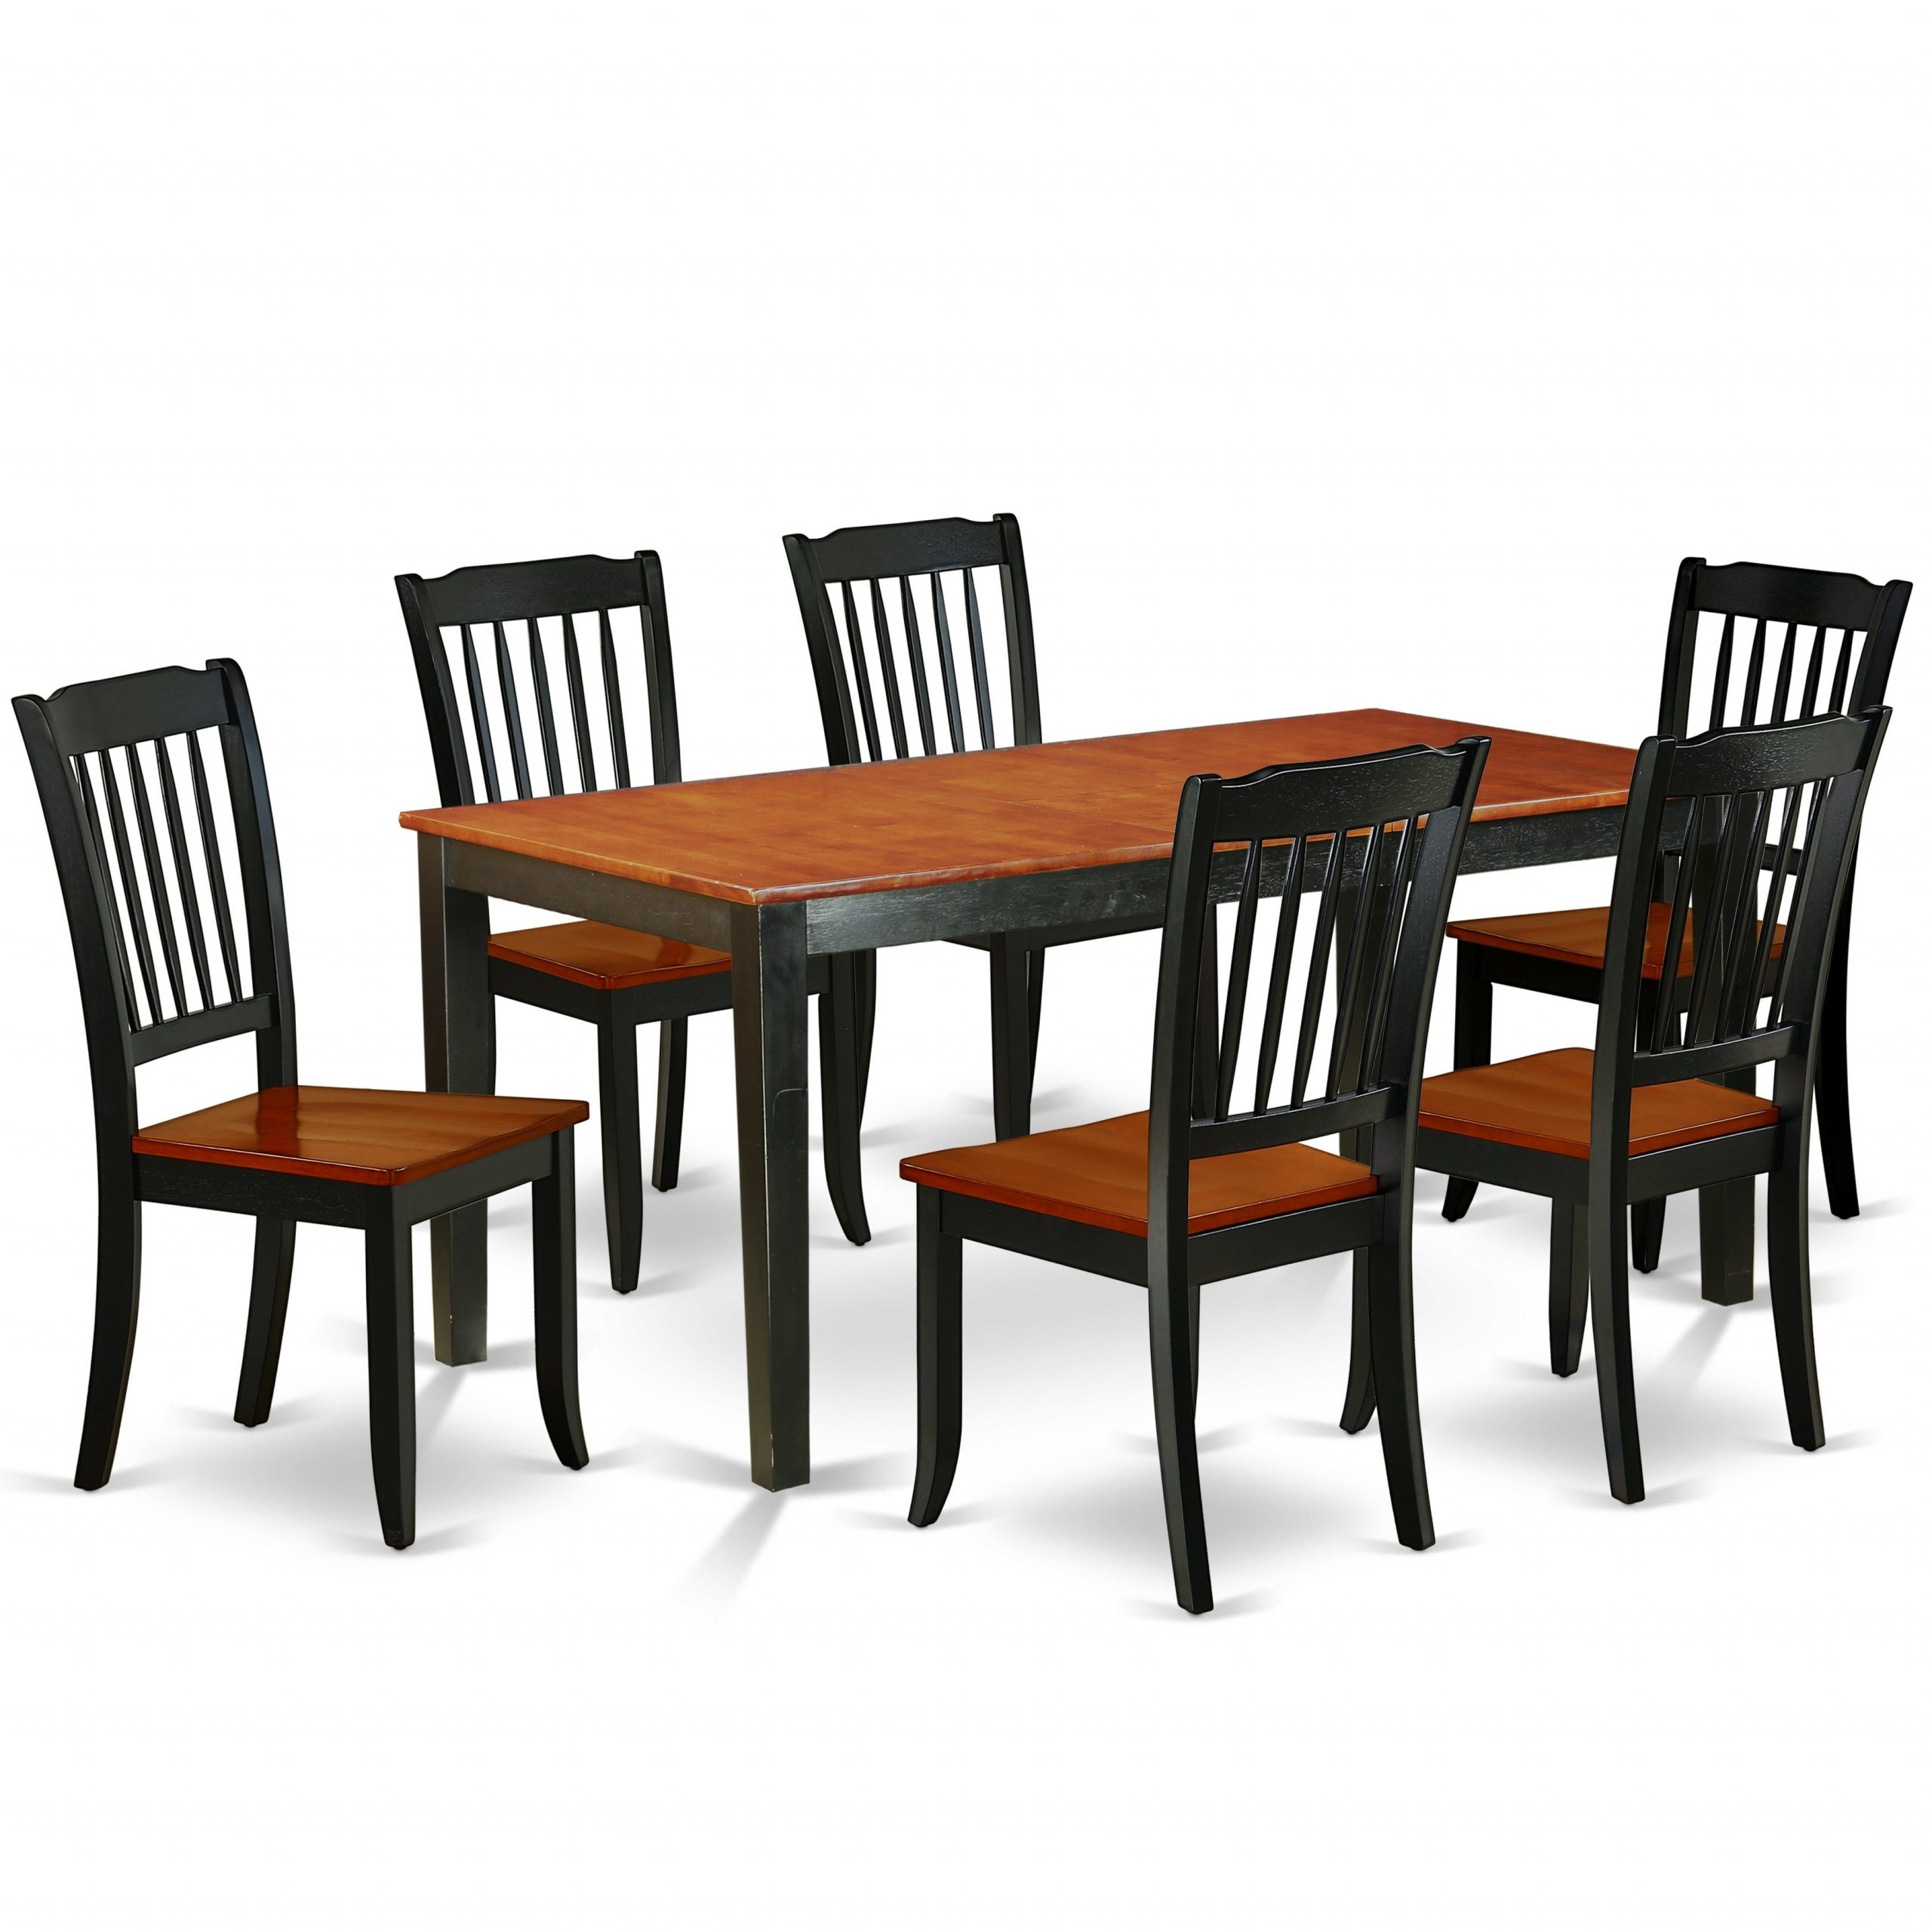 Rectangular 5466 Inch Table With 12 Leaf And 4 Vertical Slatted Chairs Number Of Chairs Option intended for proportions 3500 X 3500